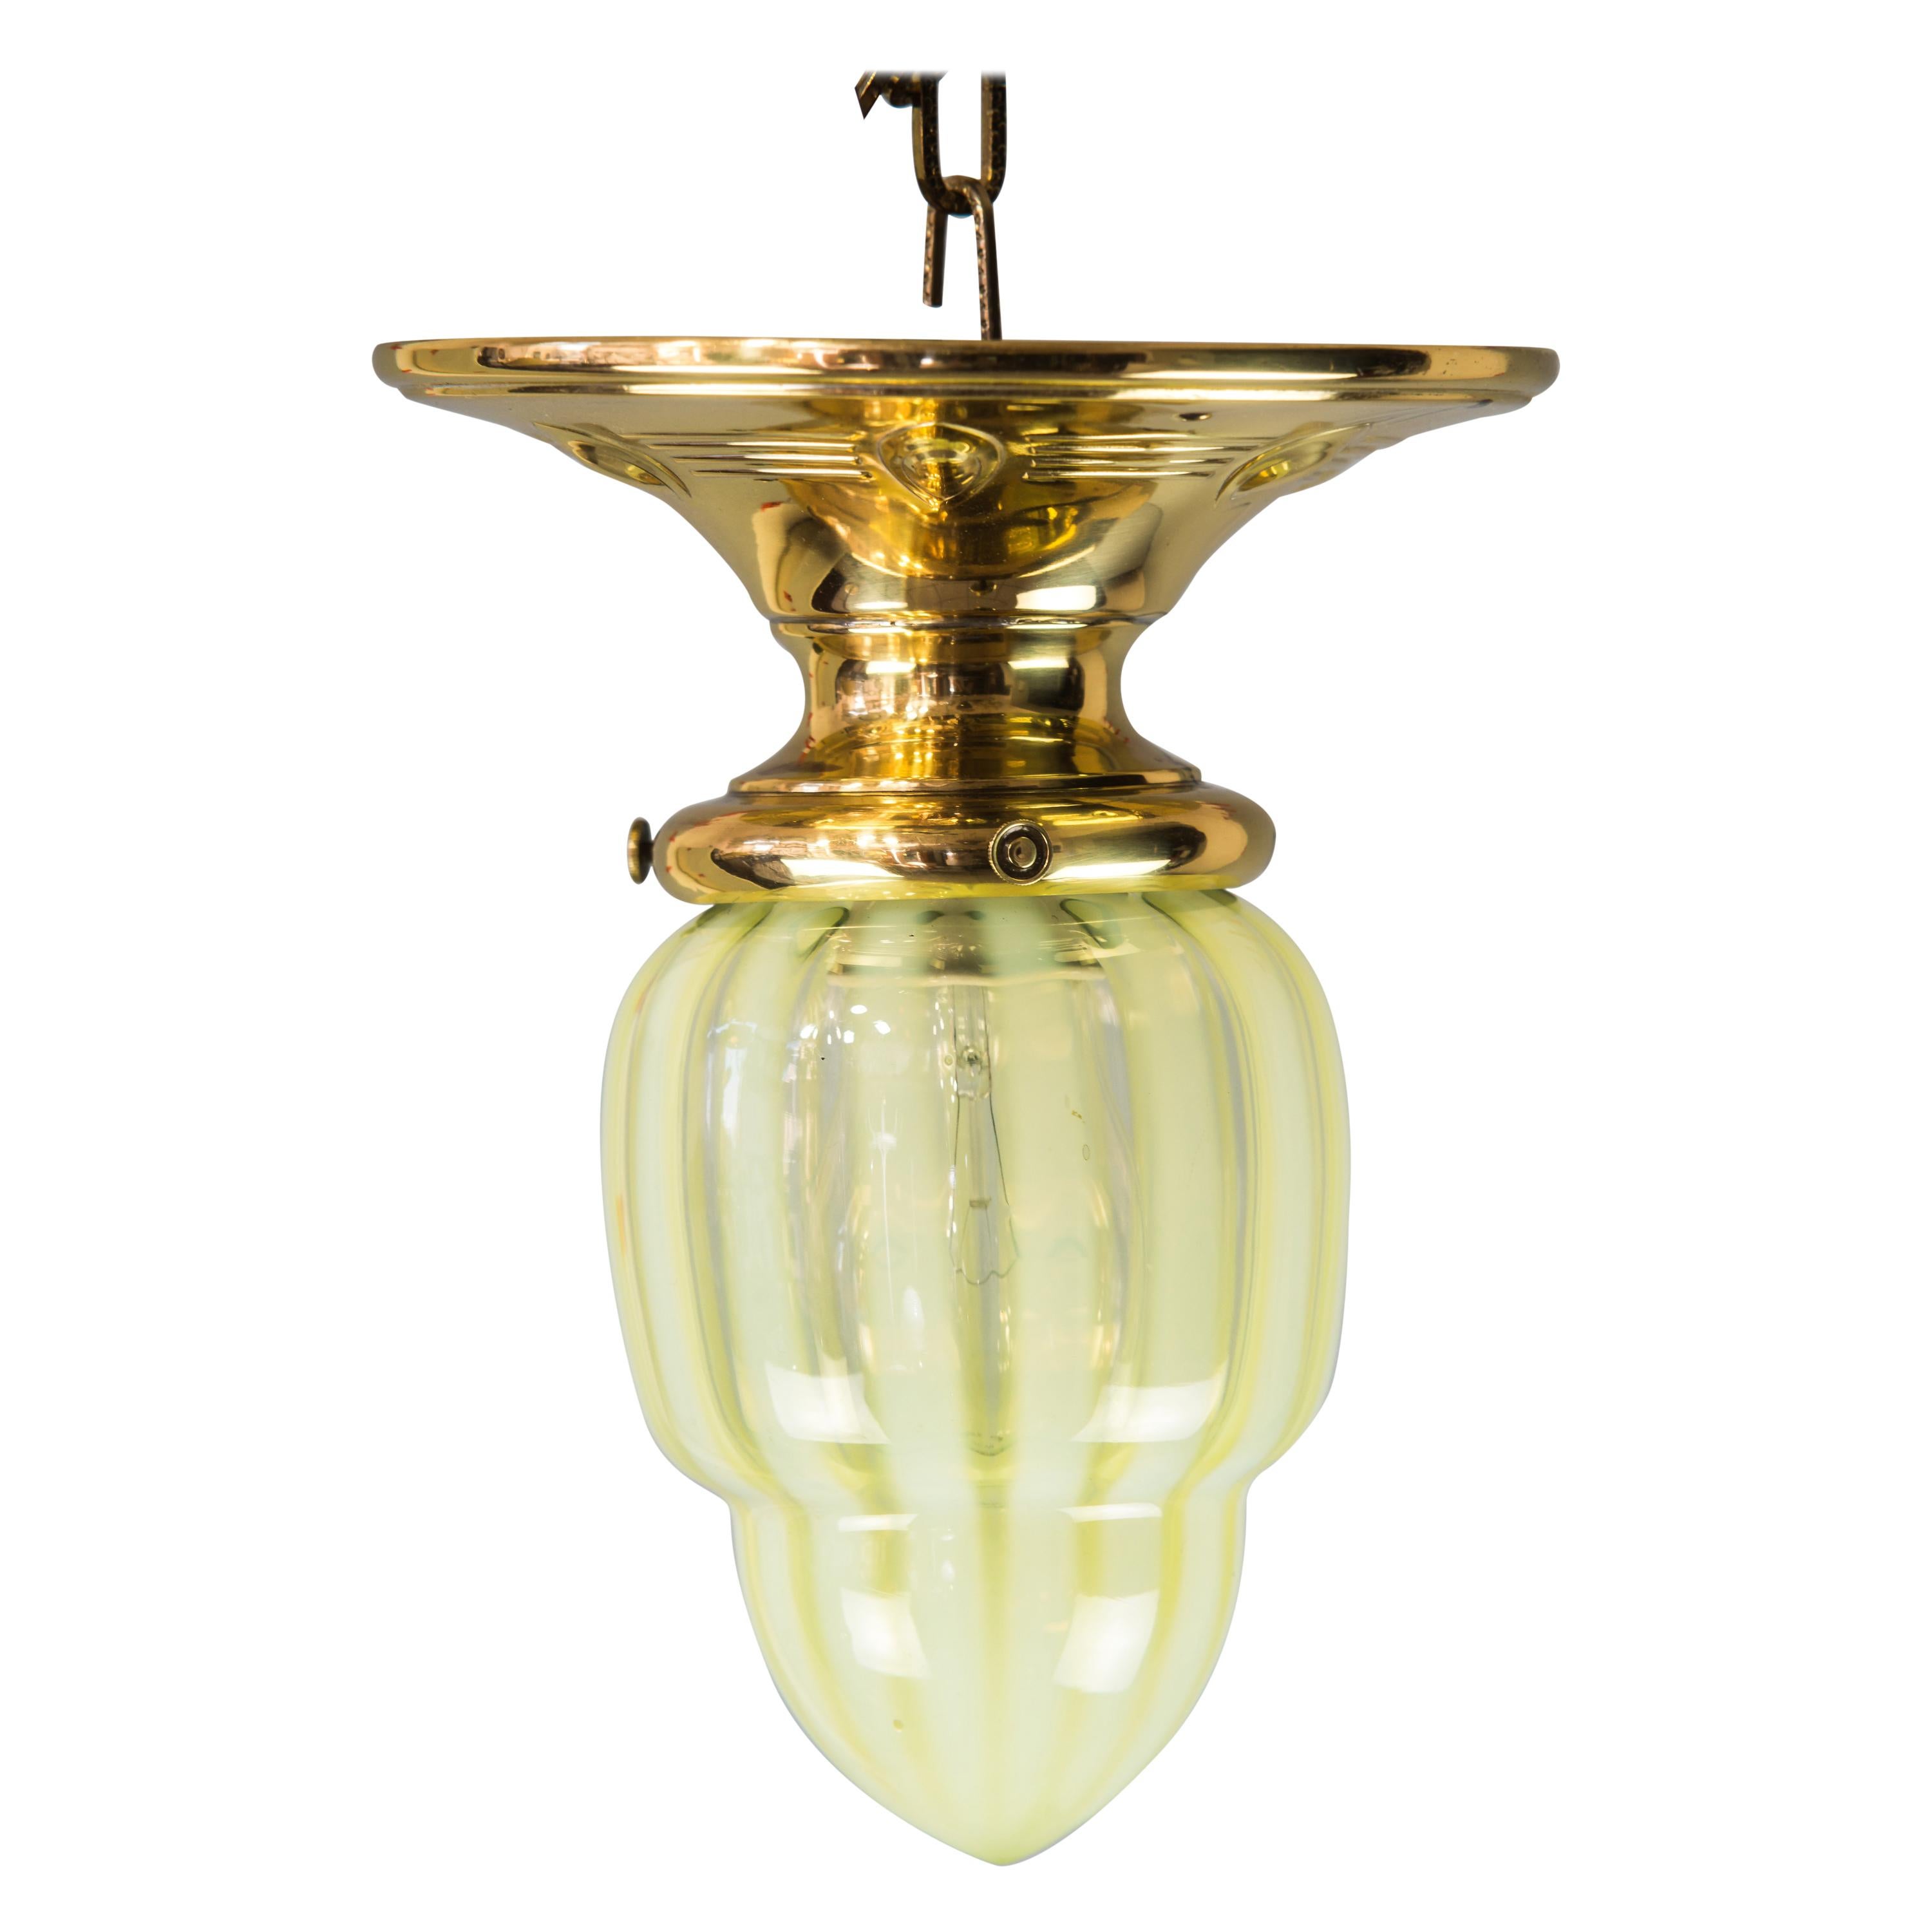 Small Jugendstil Ceiling Lamp with Original Yellow/Green Opaline Glass For Sale